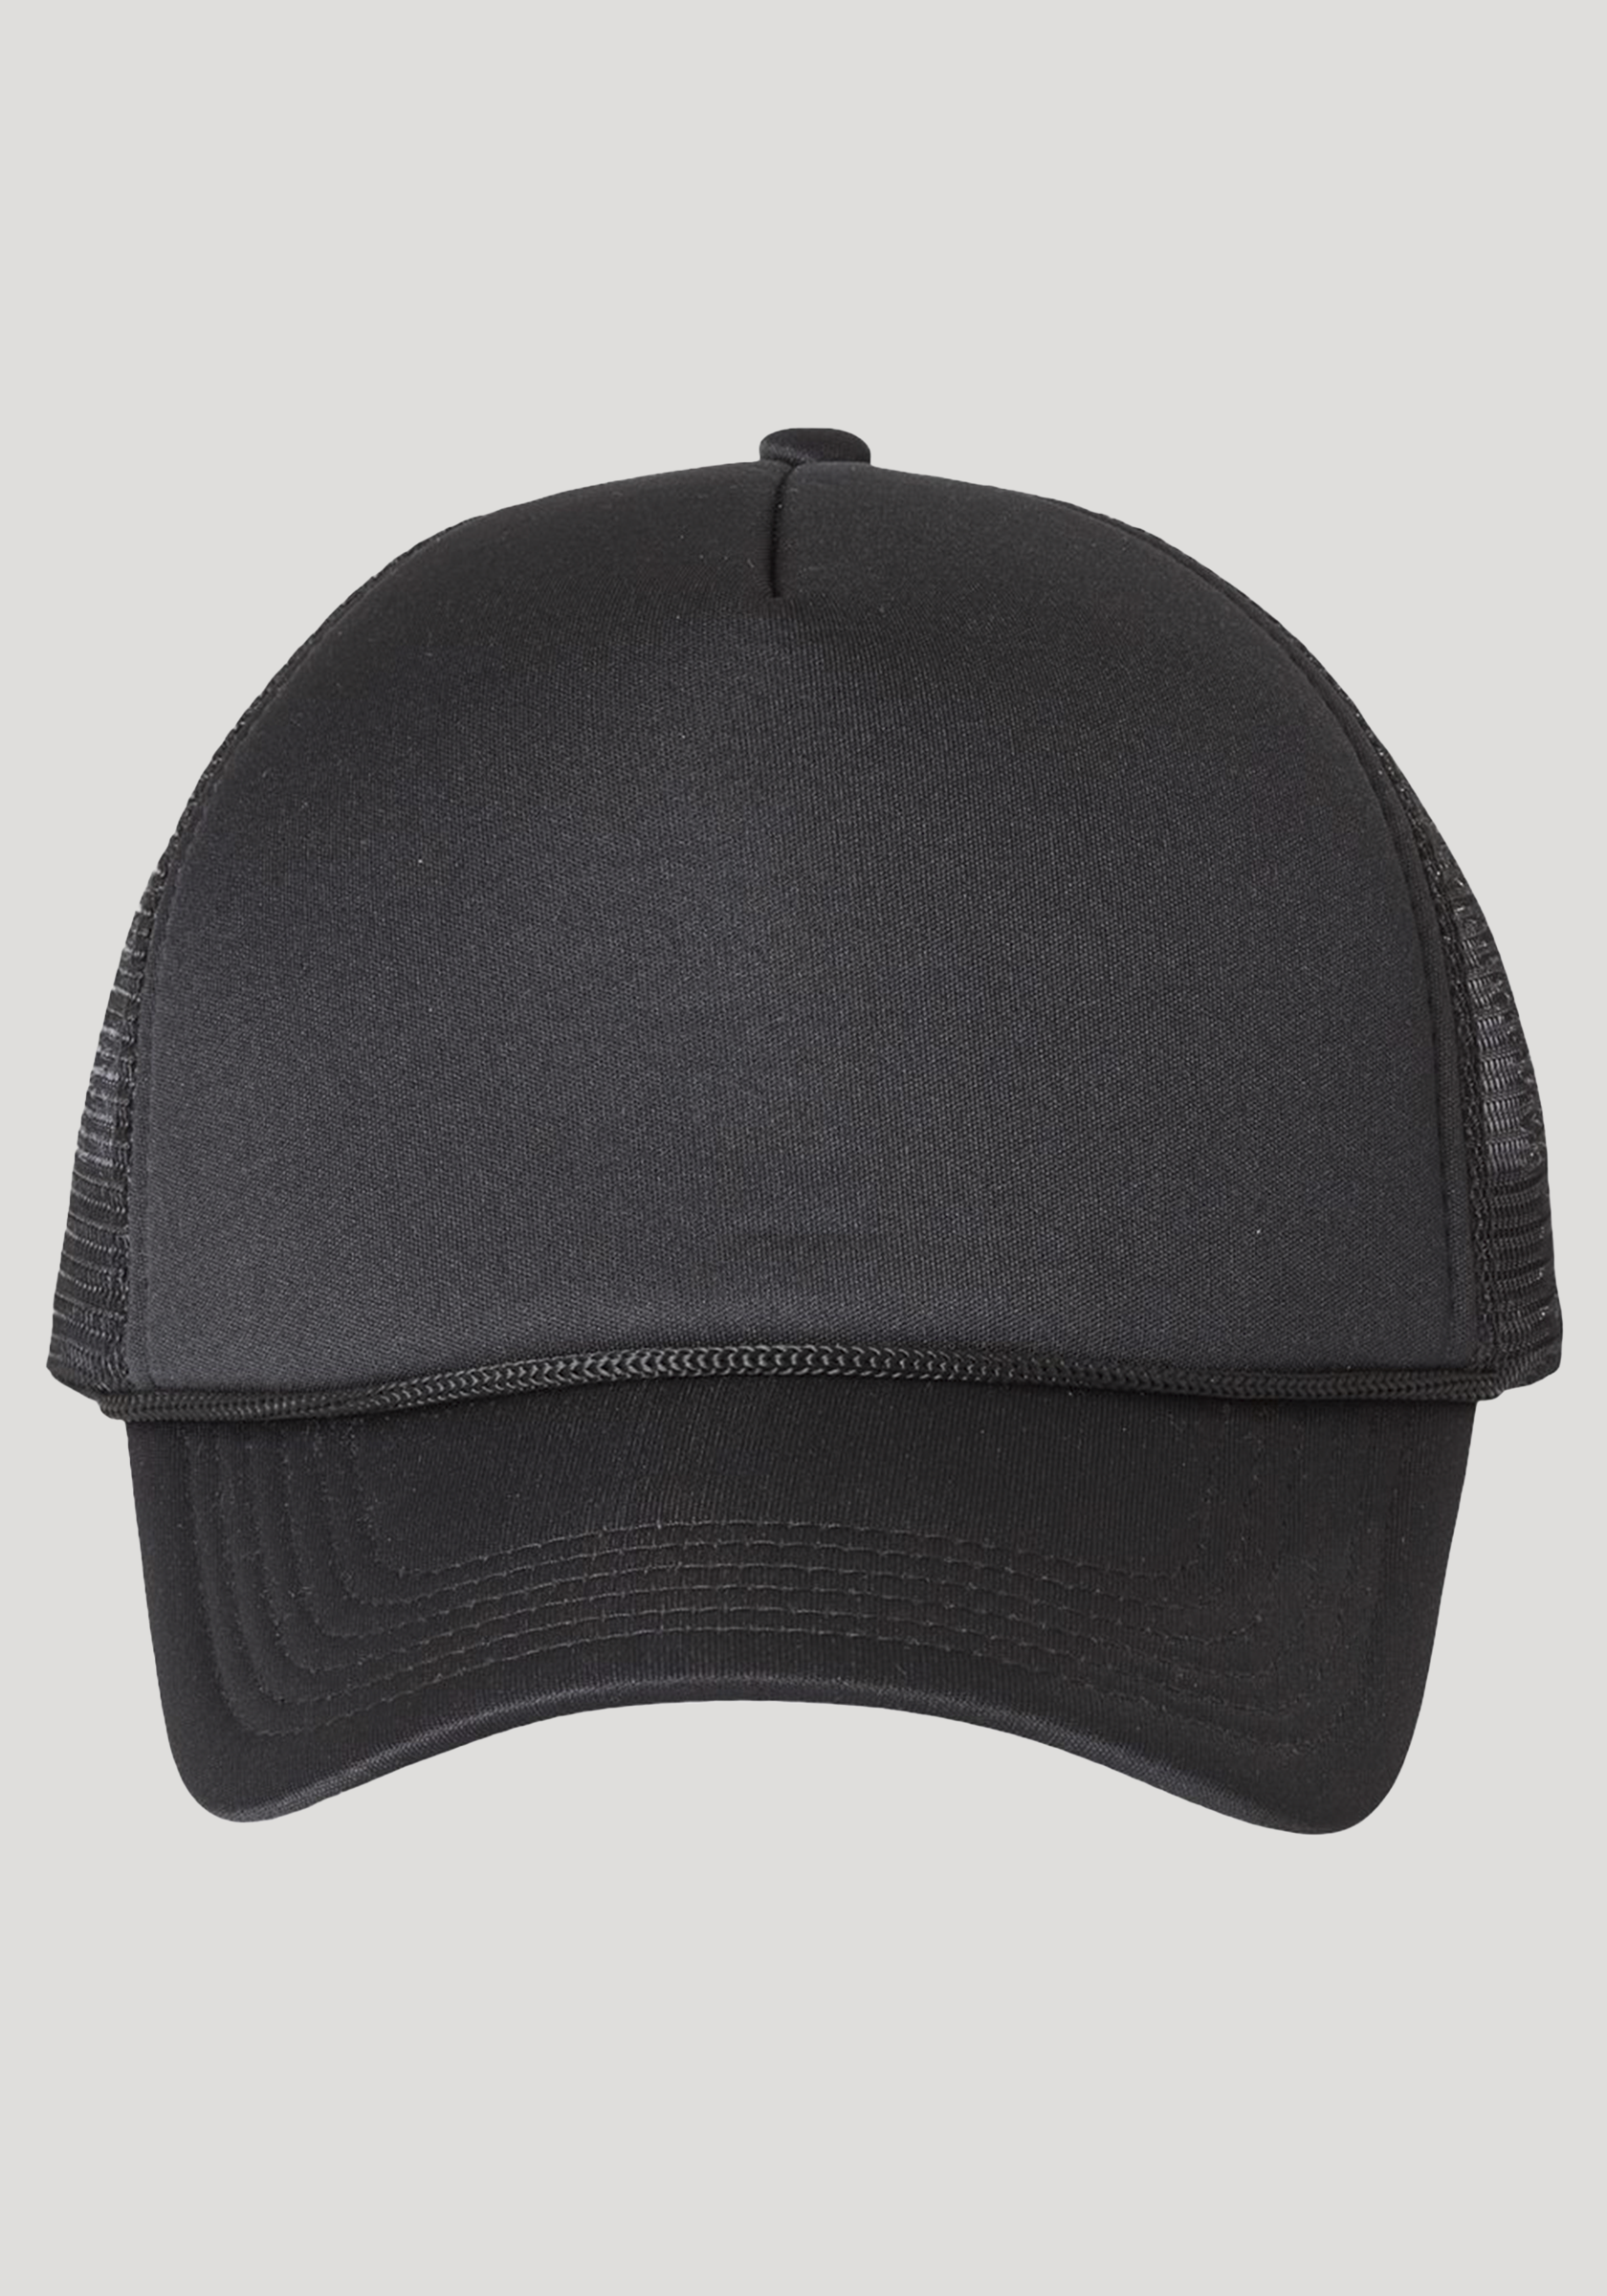 Foam Trucker Hats. High quality hats for custom printing and embroidery. 